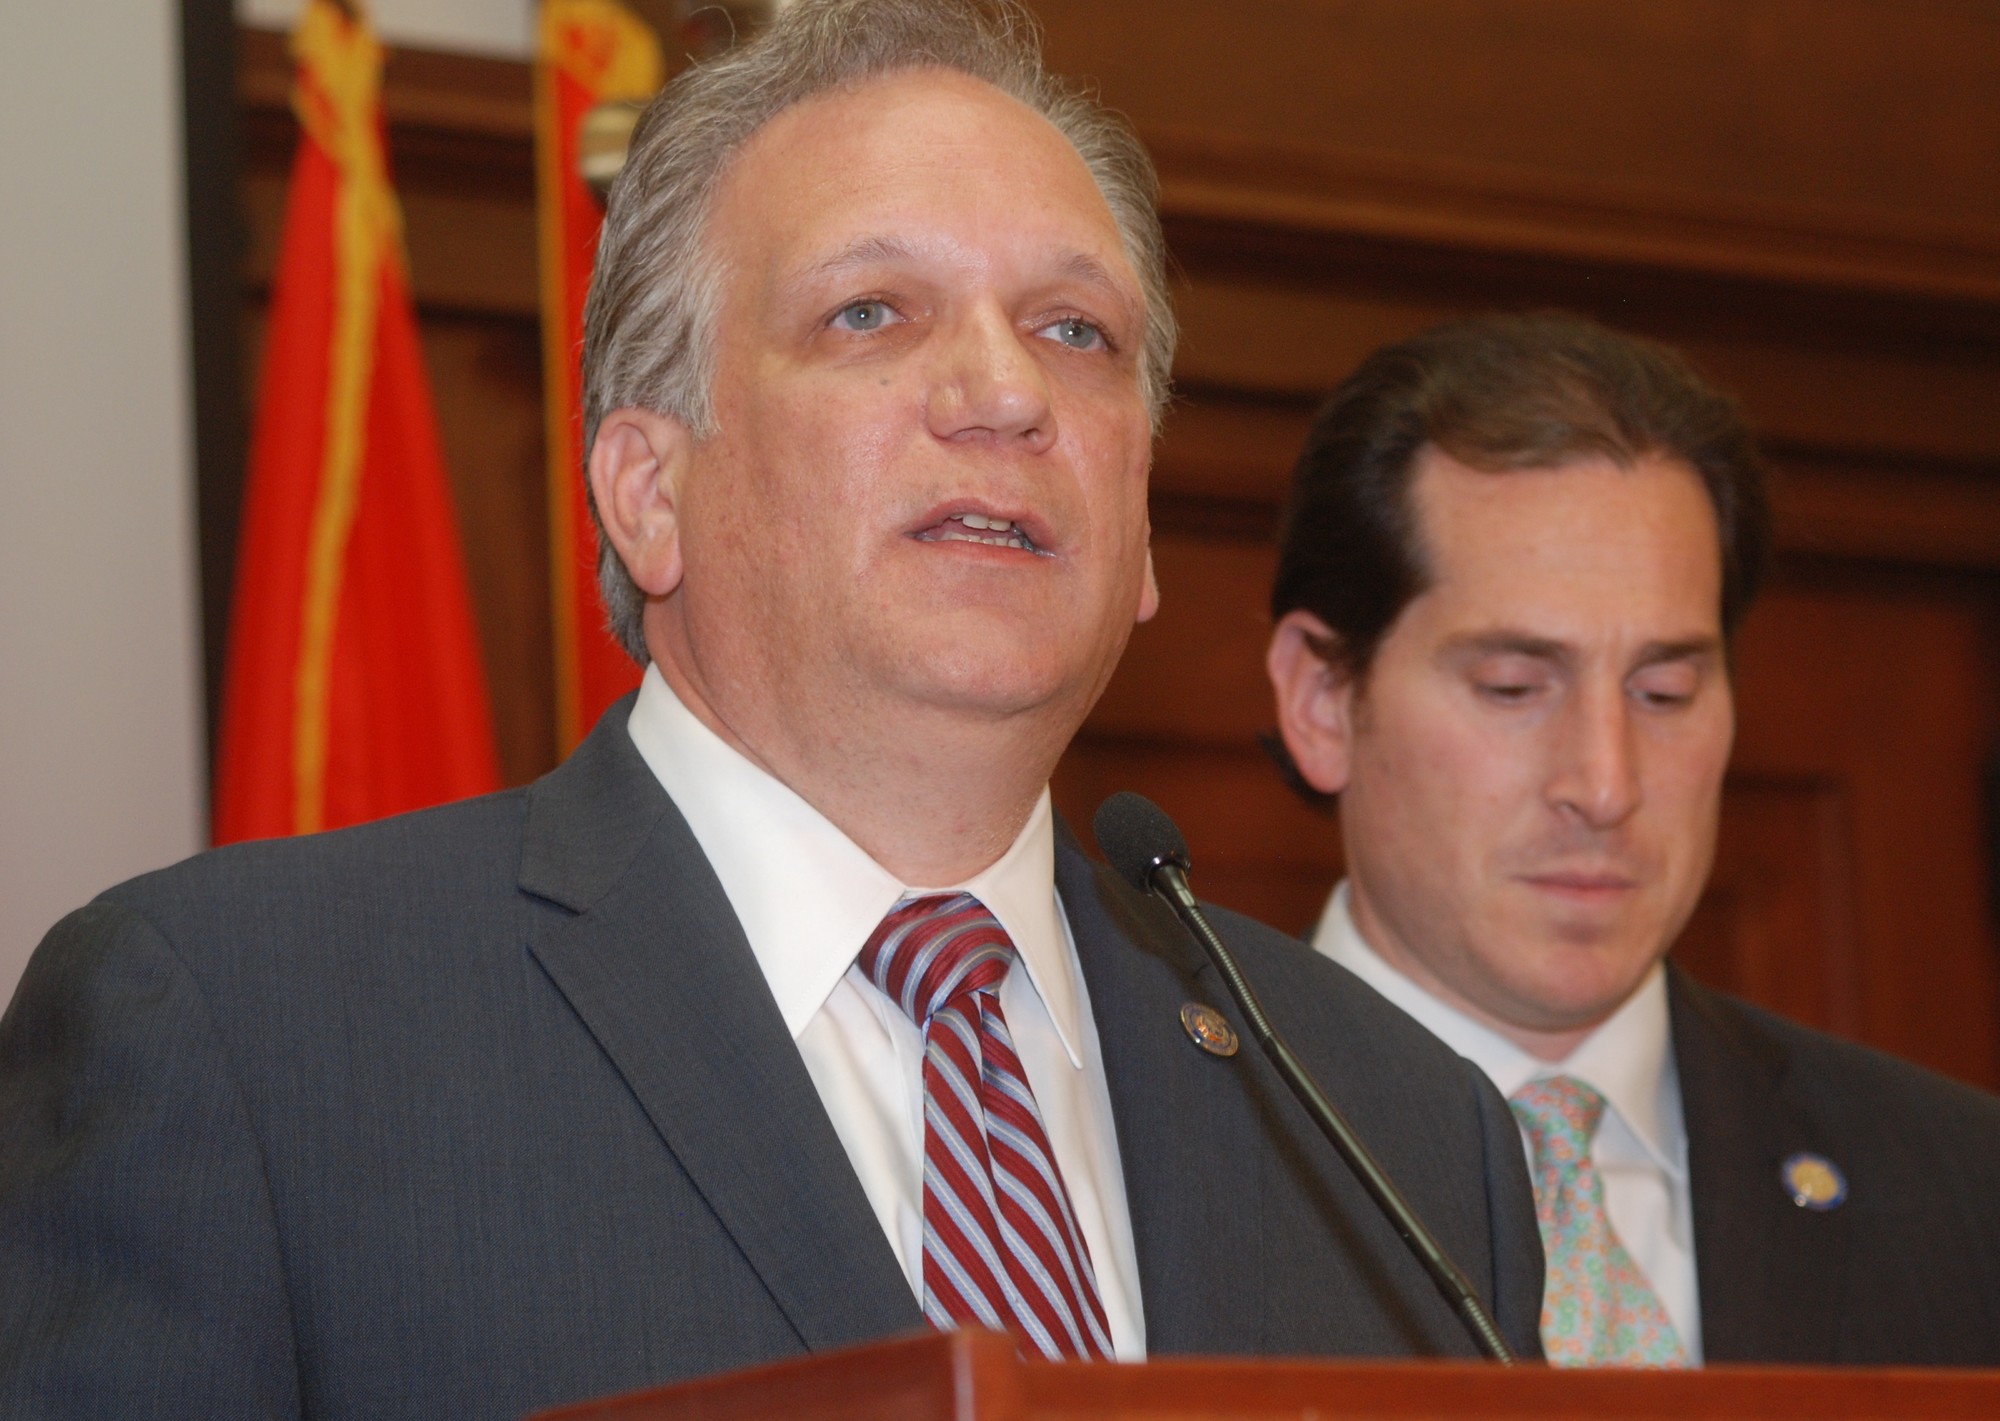 County Executive Ed Mangano said the diversion plan would cost $200 million to $300 million. At back was newly elected State Sen. Todd Kaminsky, who pledged to fight for funding for the project.